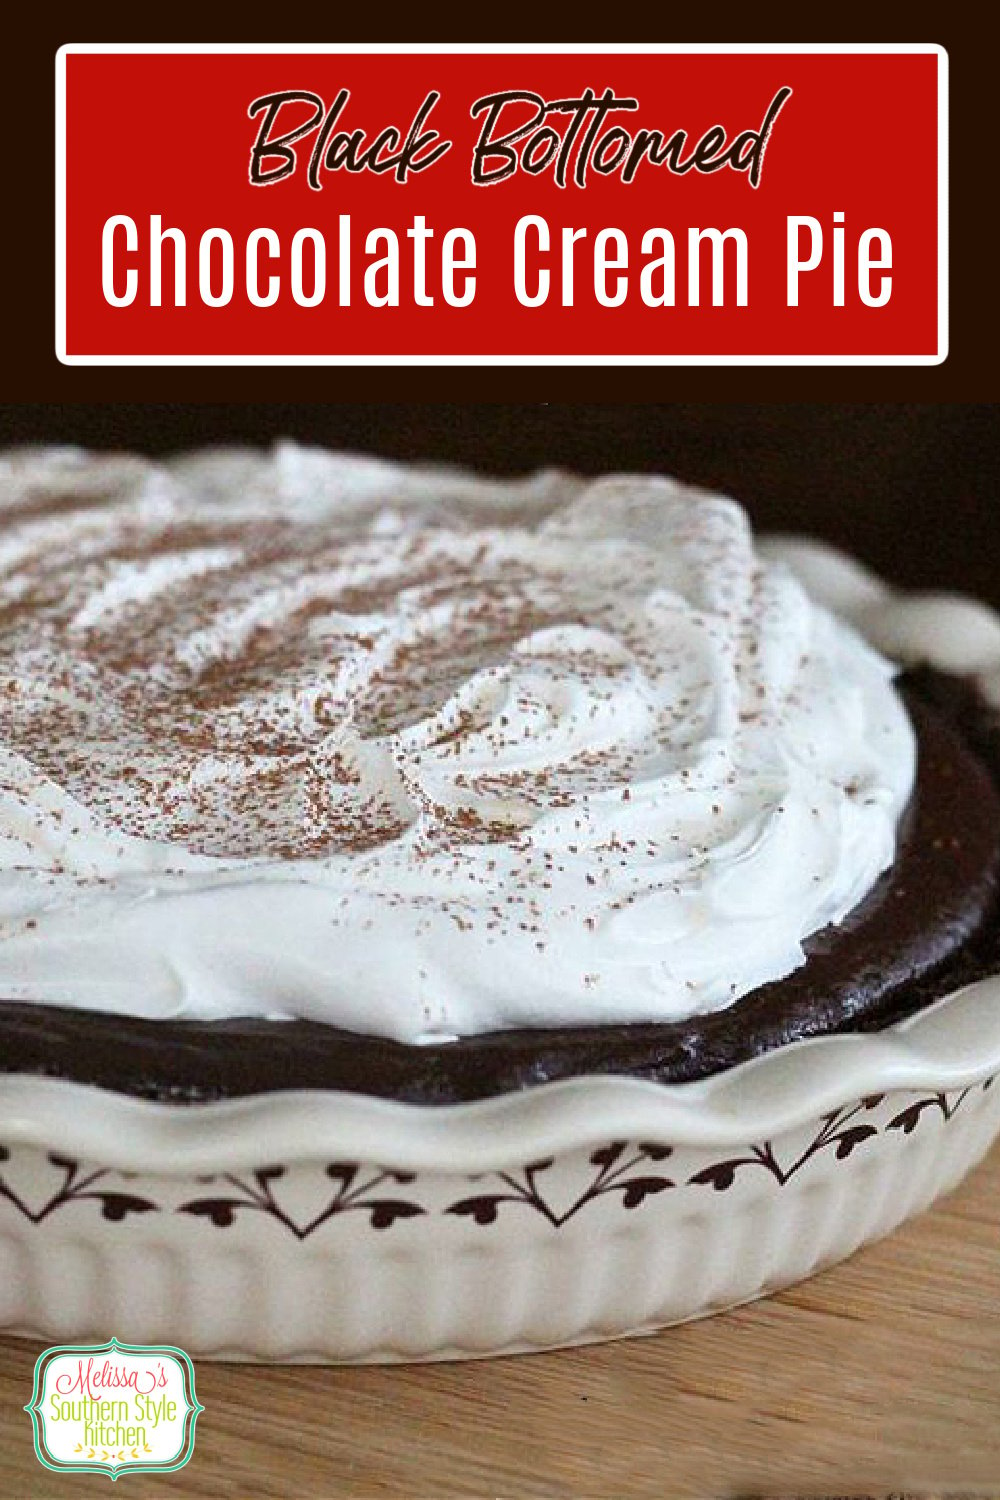 This rich and indulgent Black Bottomed Chocolate Cream Pie features a velvety homemade chocolate custard filling and a chocolate cookie crust #chocolatepie #chocolate #chocolatecreampie #pierecipes #pie #chocolatedesserts #chocolatepierecipes #southernpies